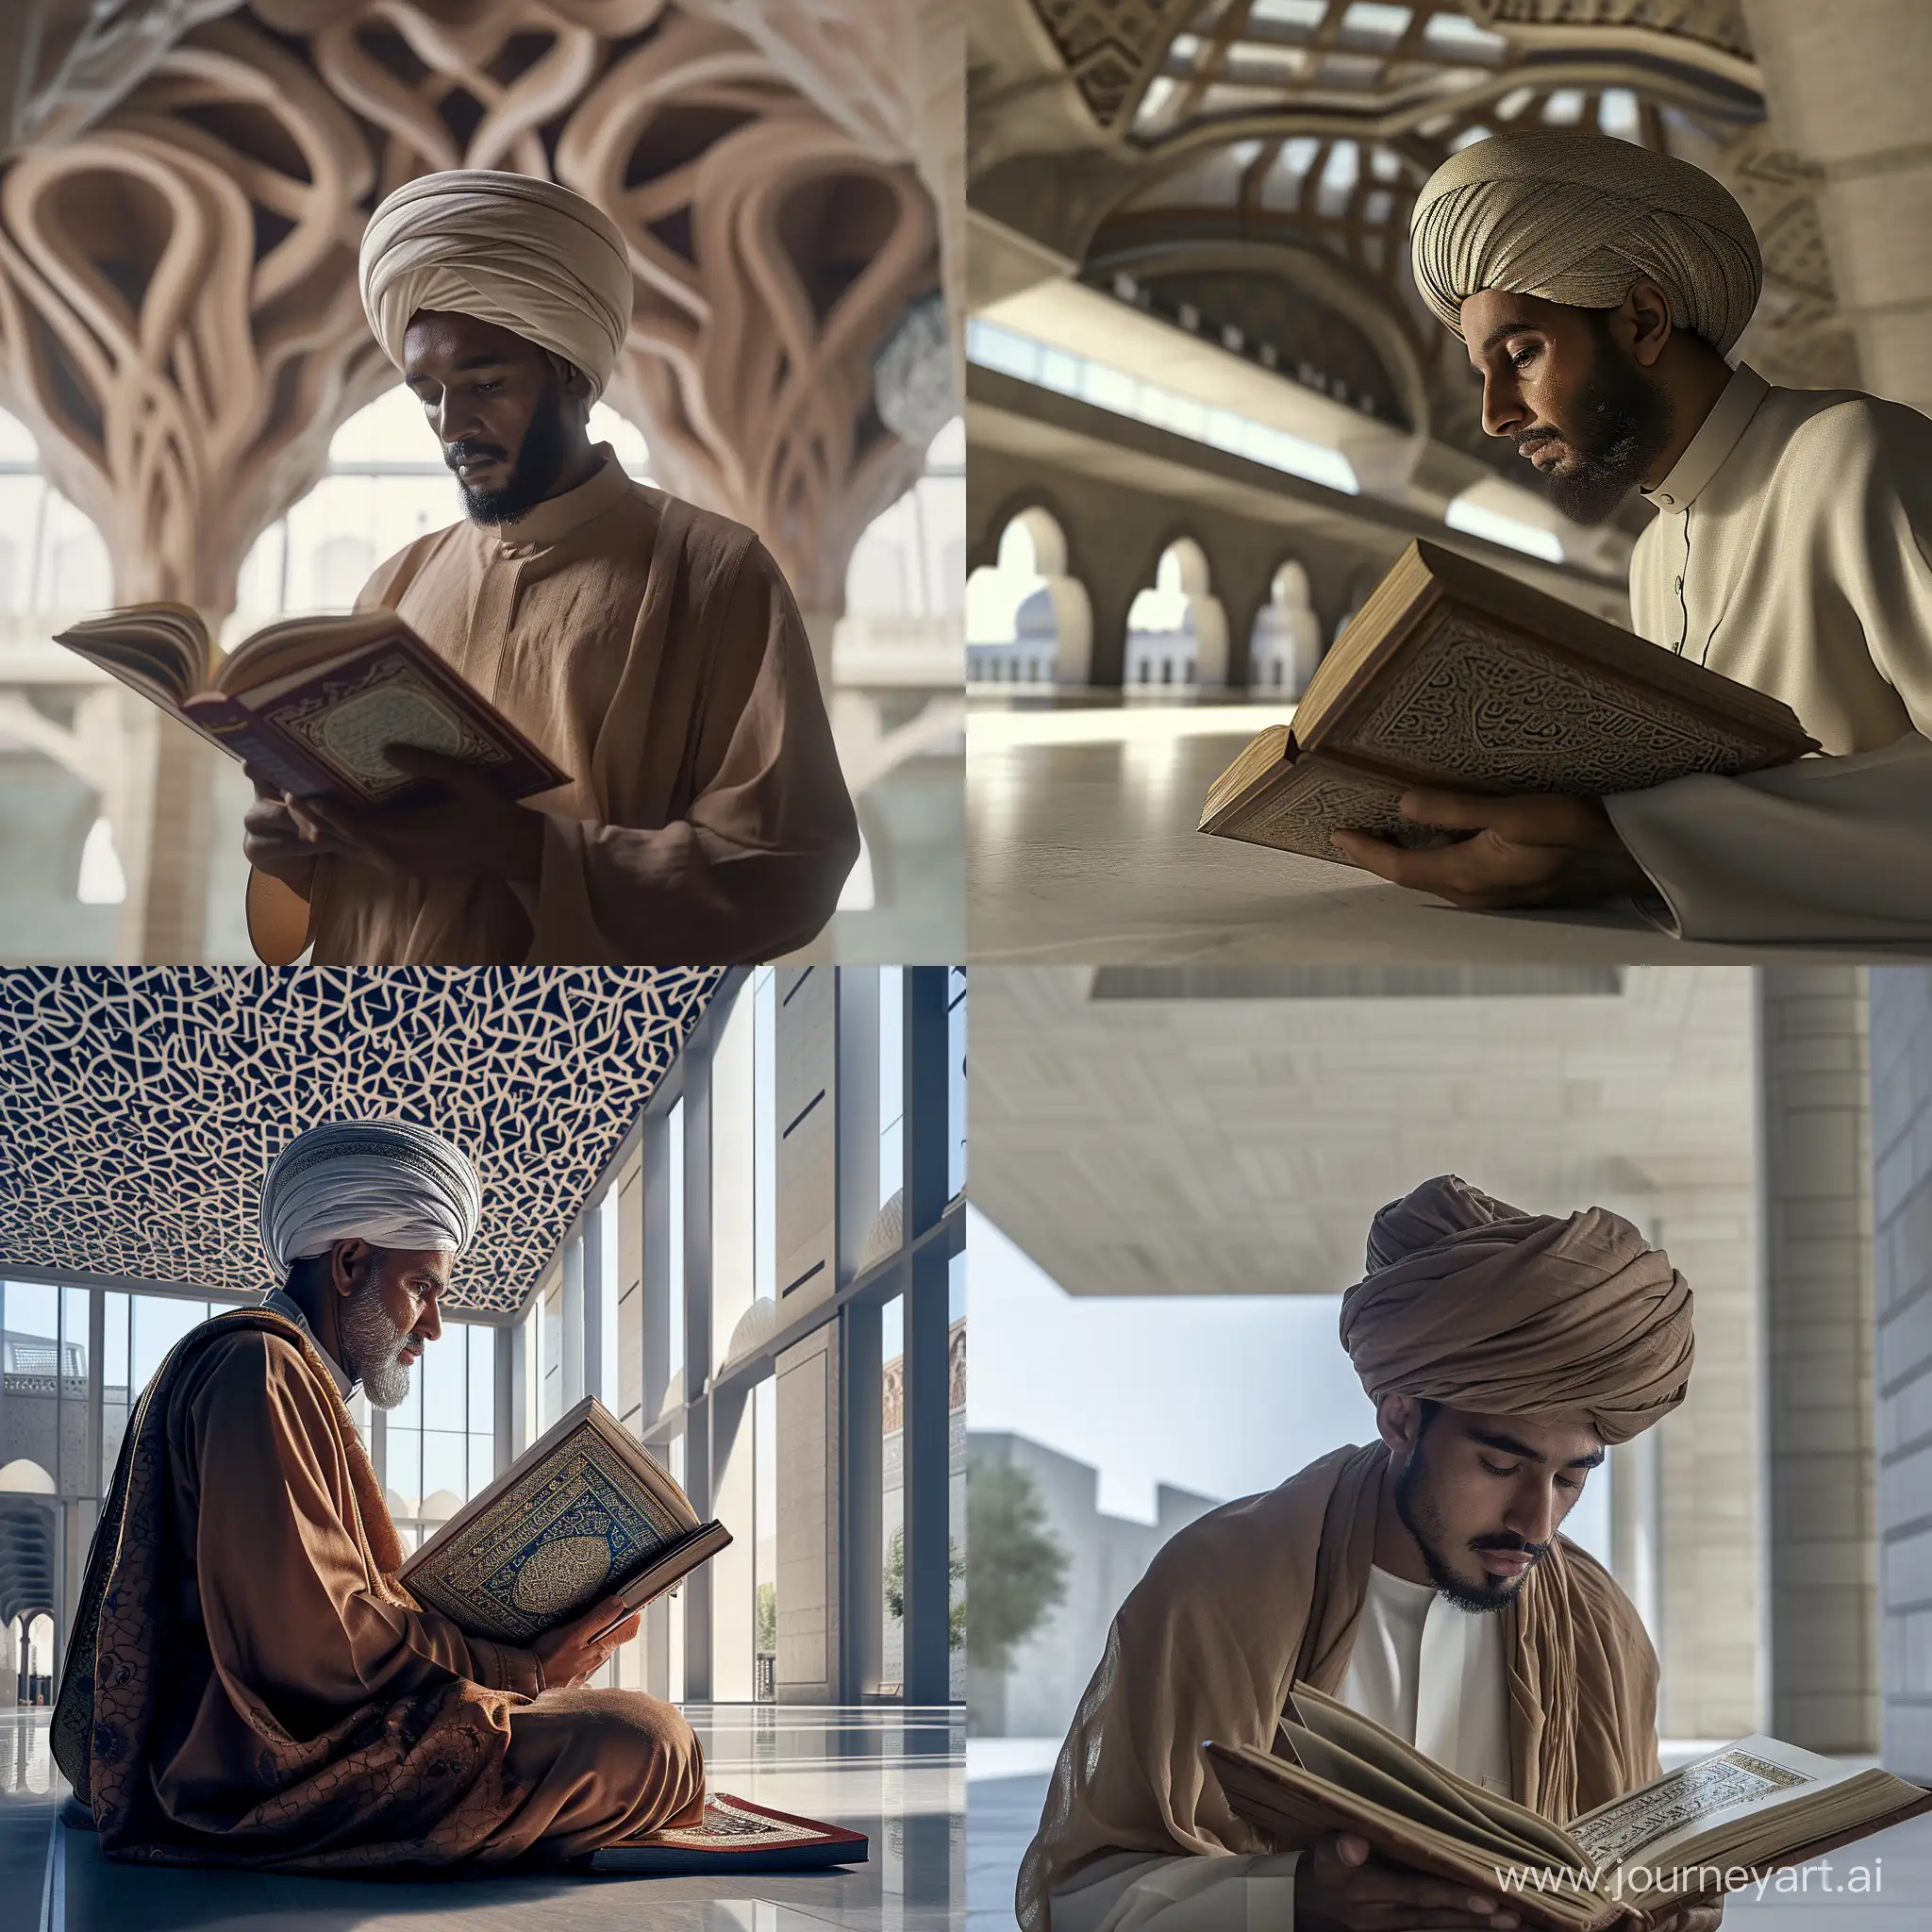 ultra realistic, a man wearing a turban while reading the Quran, modern mosque, canon eos-id x mark iii dslr --v 6.0